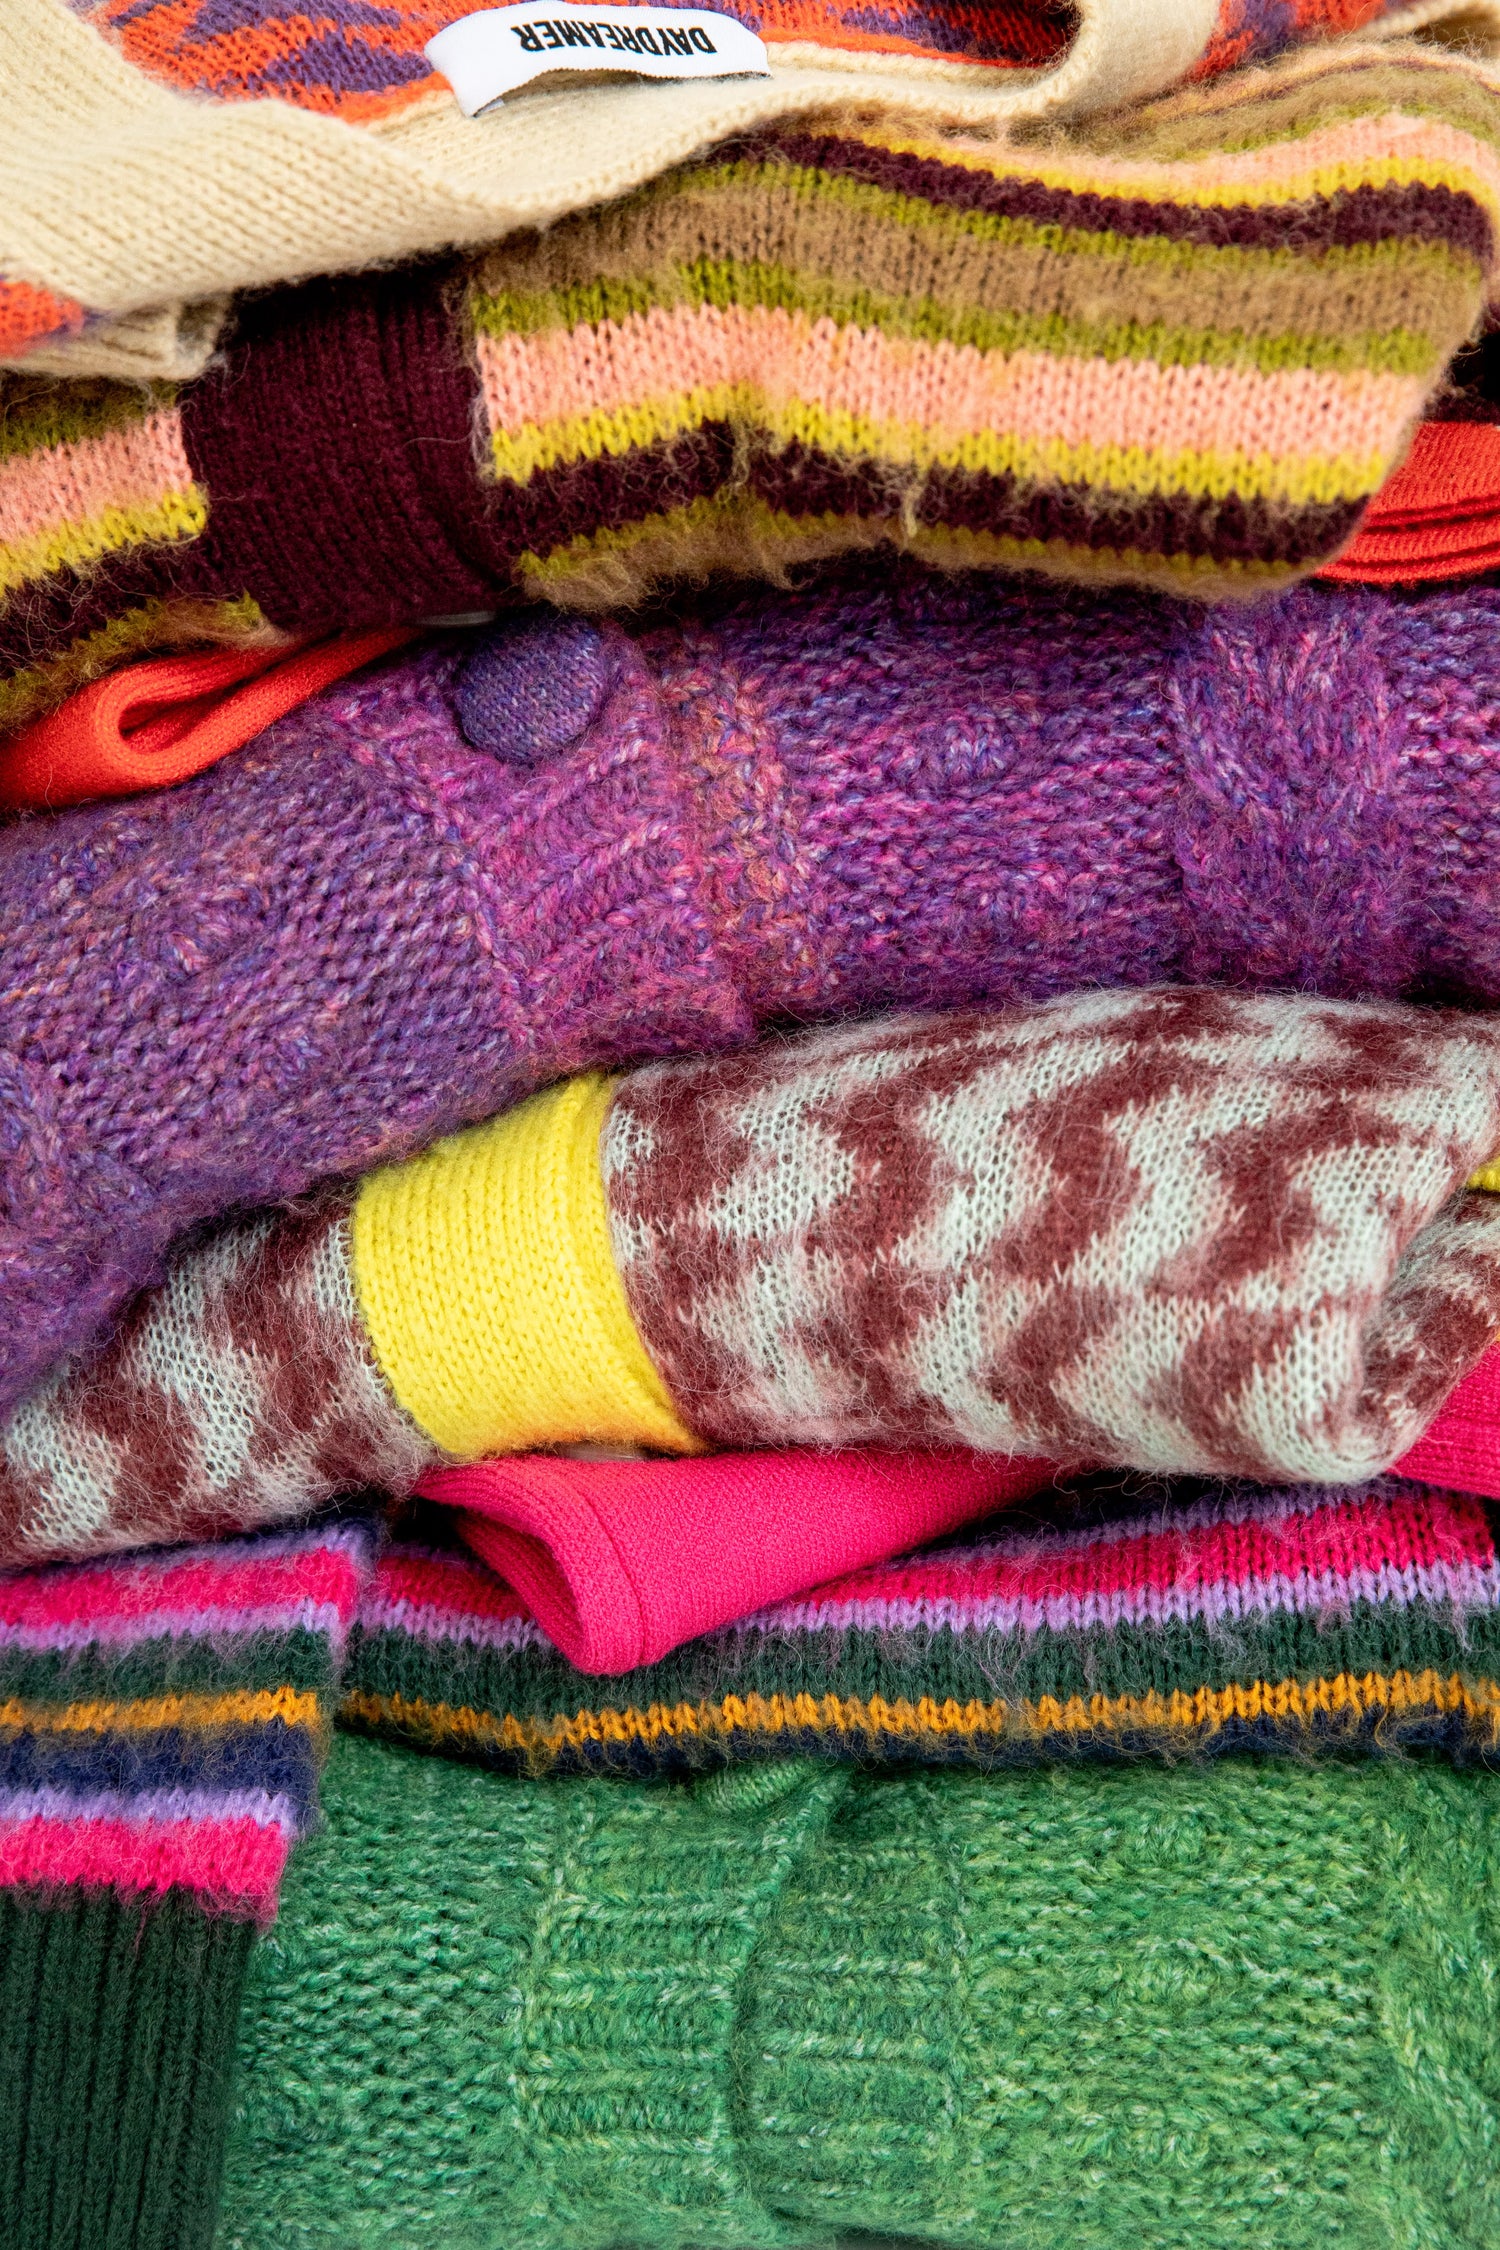 STACK OF MULTICOLORED AND PATTERNED KNITS AND SWEATERS